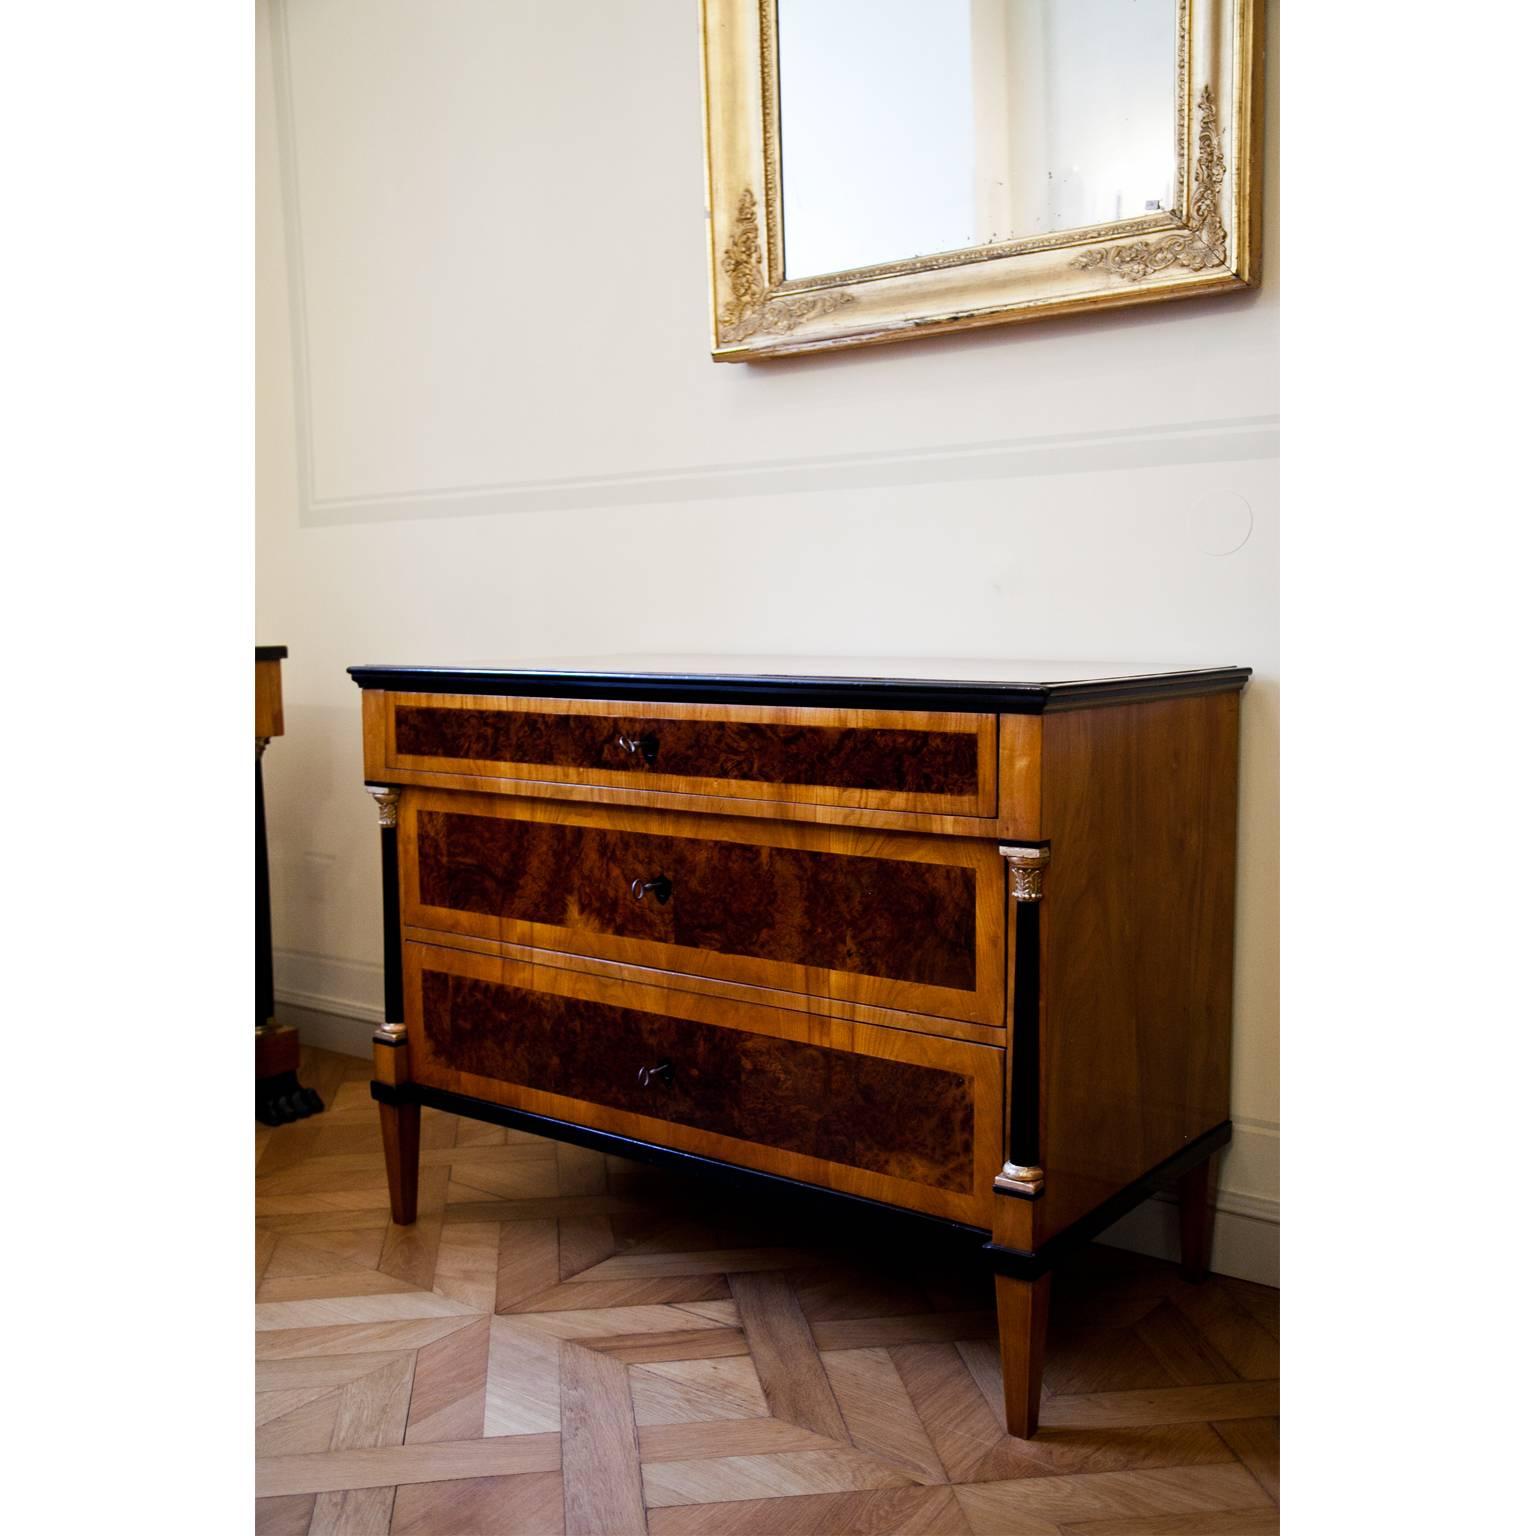 Three-drawered Biedermeier chest of drawers on tapered legs. The streamlined body shows ebonized and partly gilt columns, supporting the slightly protruding top drawer. The front is inlaid with burl wood veneer and the edges are ebonized as well.